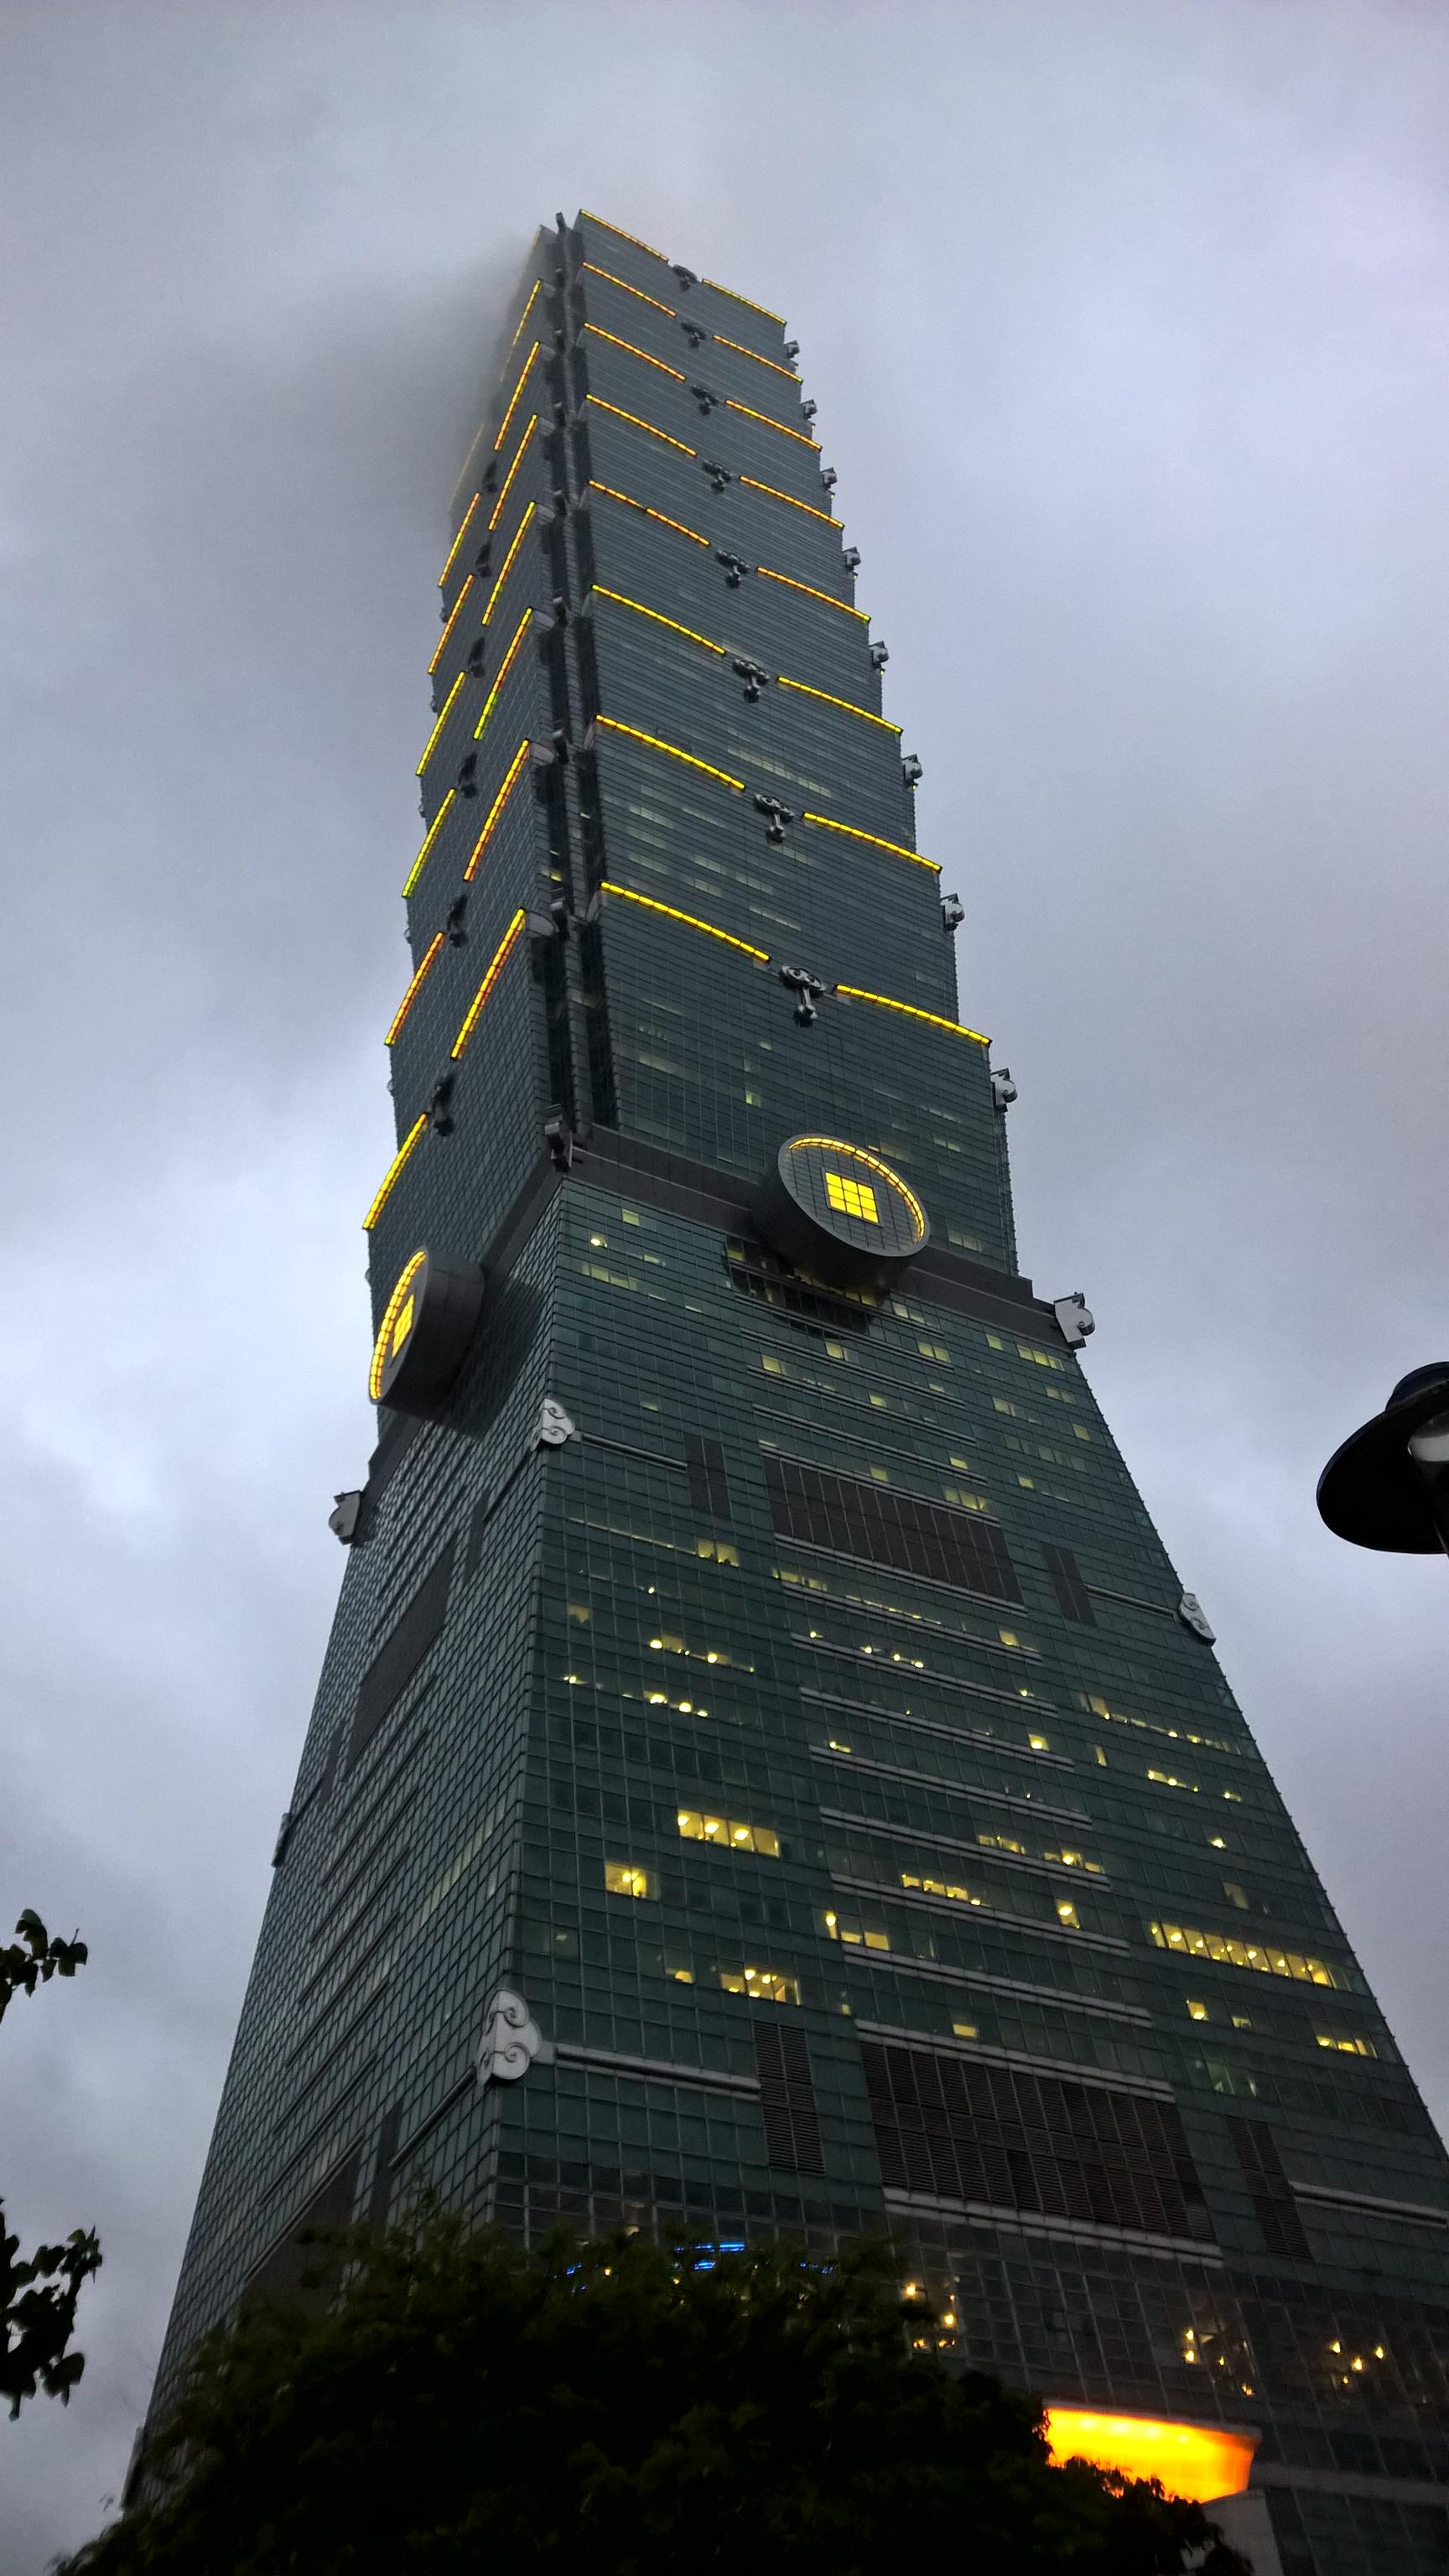 Taipei 101 in Taiwan disappearing into the clouds.